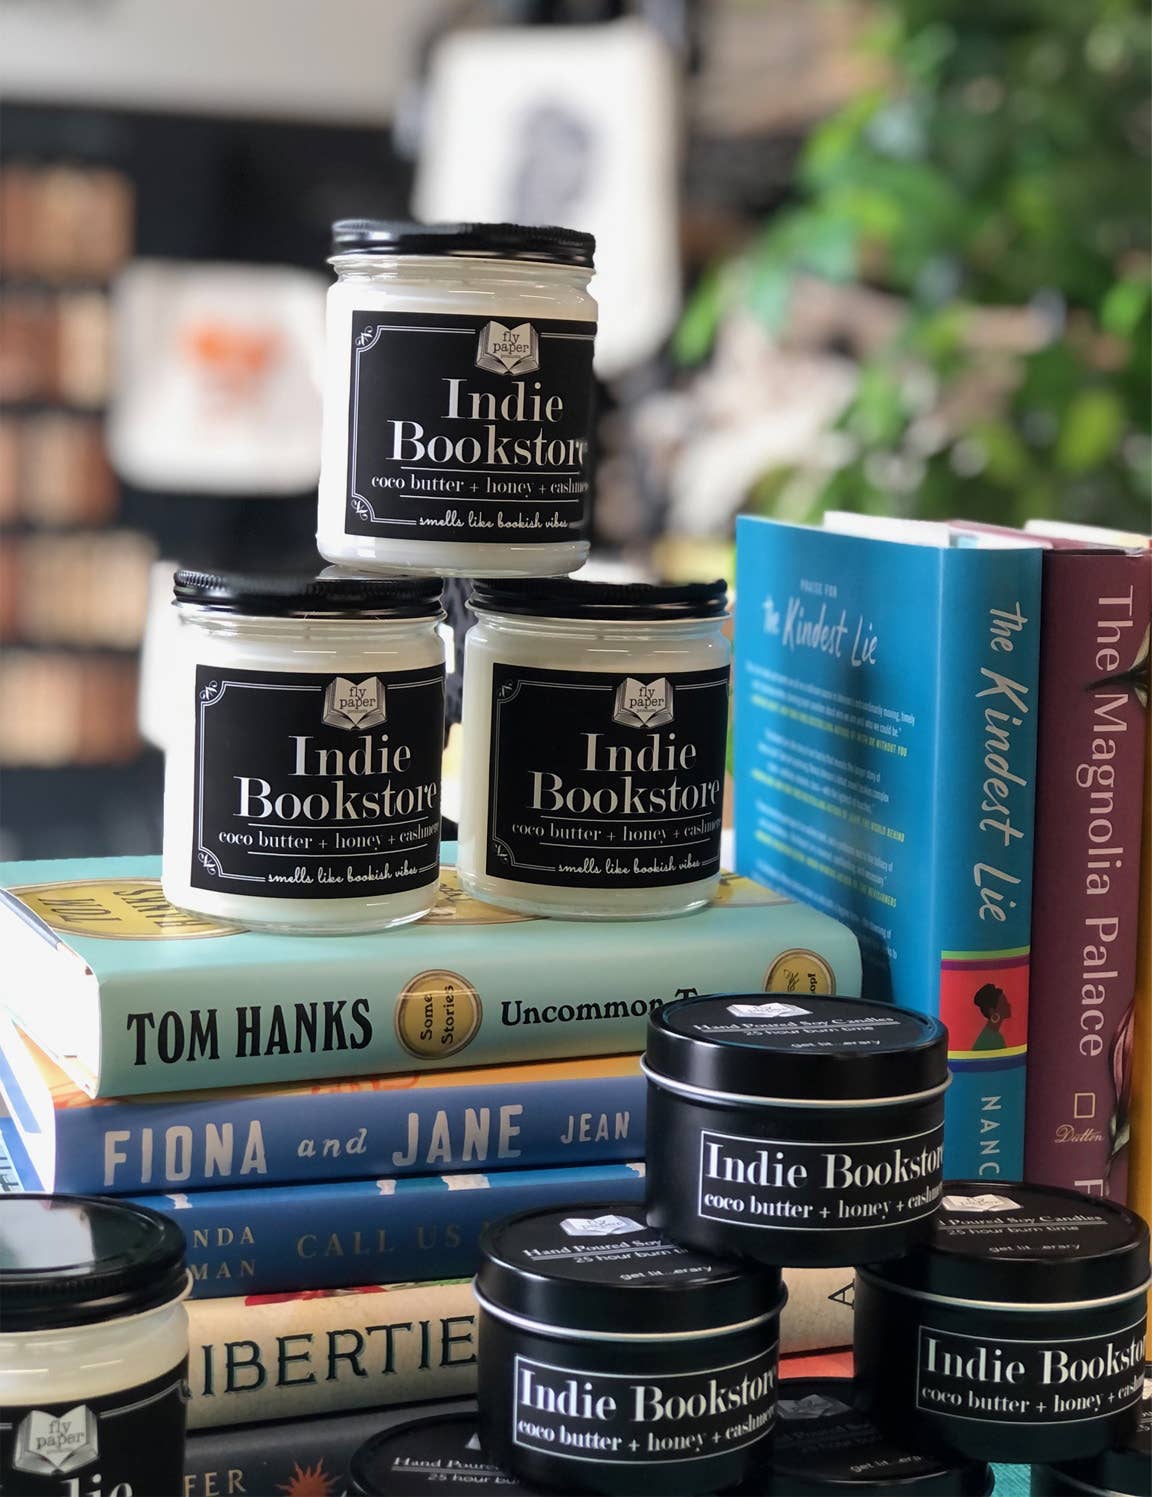 Fly Paper Products - Indie Bookstore 9oz Soy Candle Contest Winner